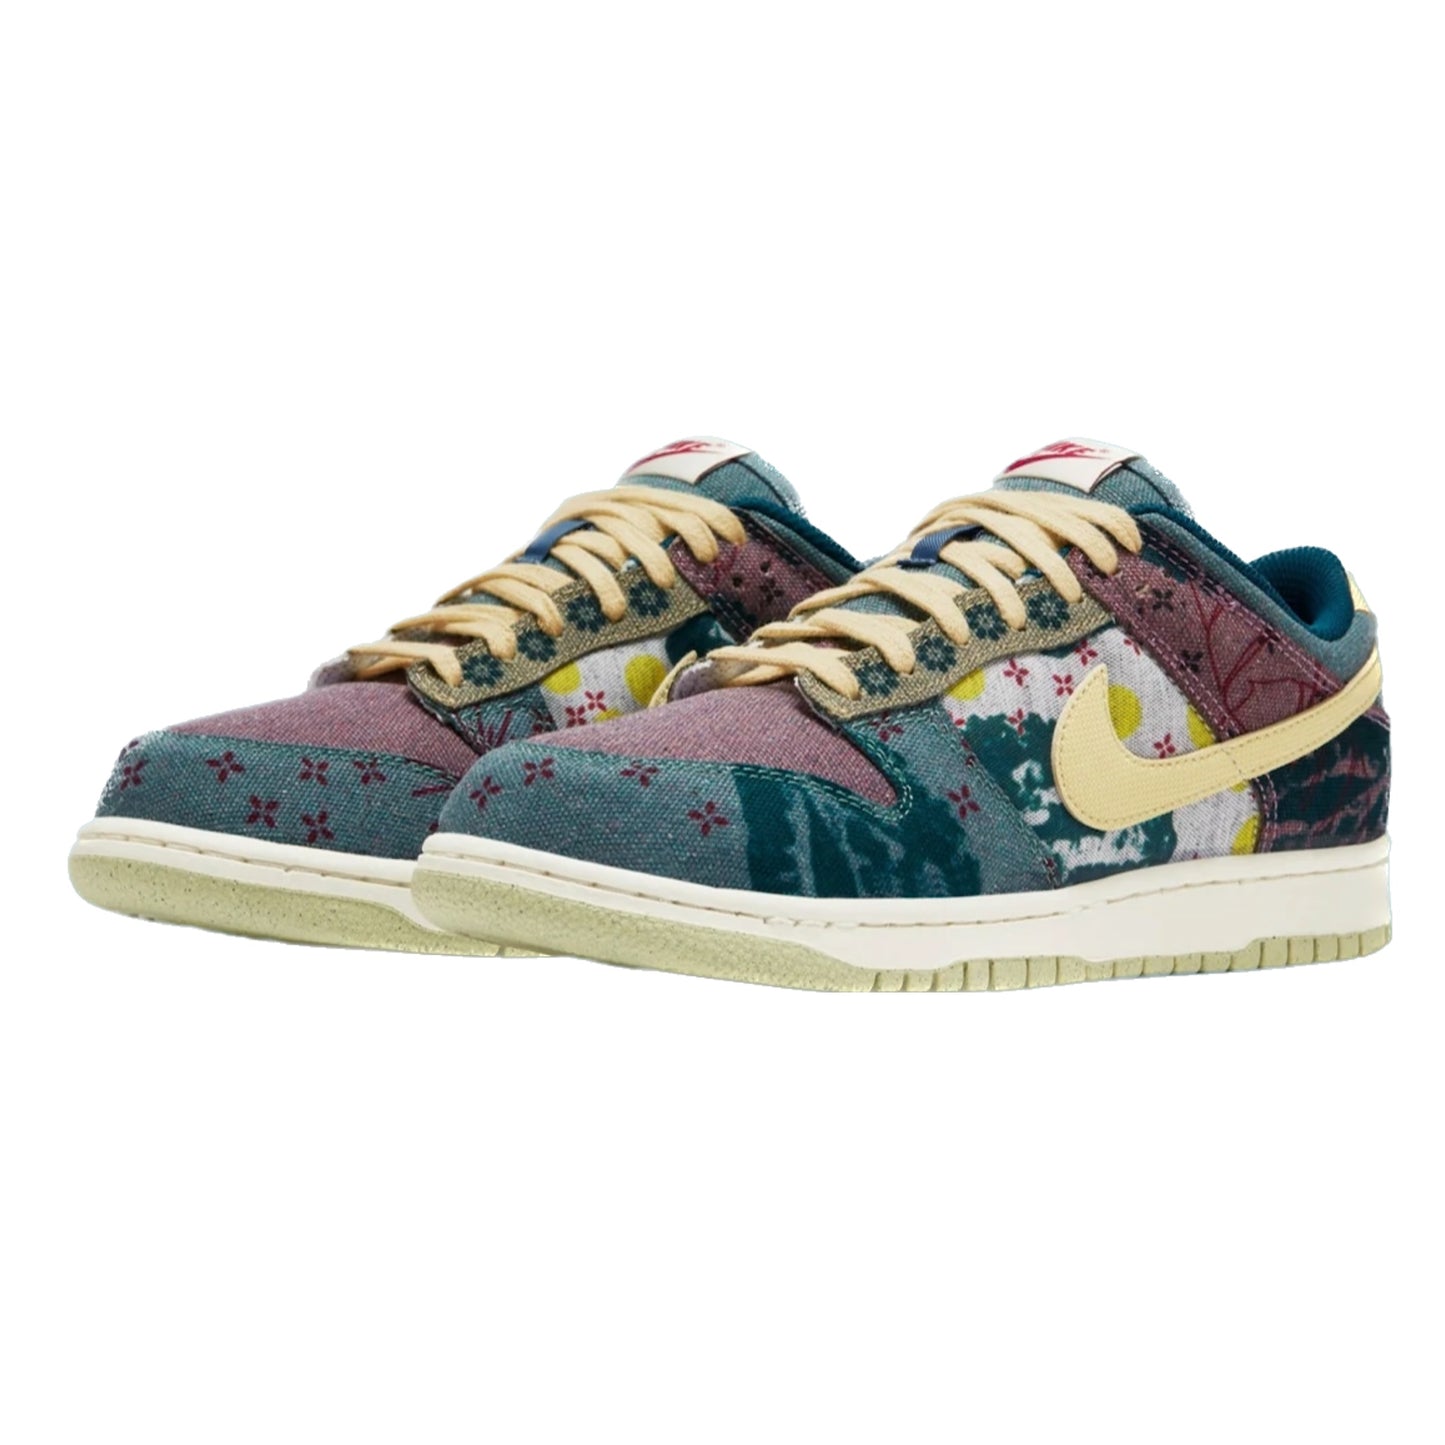 Nike Dunk Low Community Garden Multi Color Midnight Turquoise Cardinal Red Lemon Wash